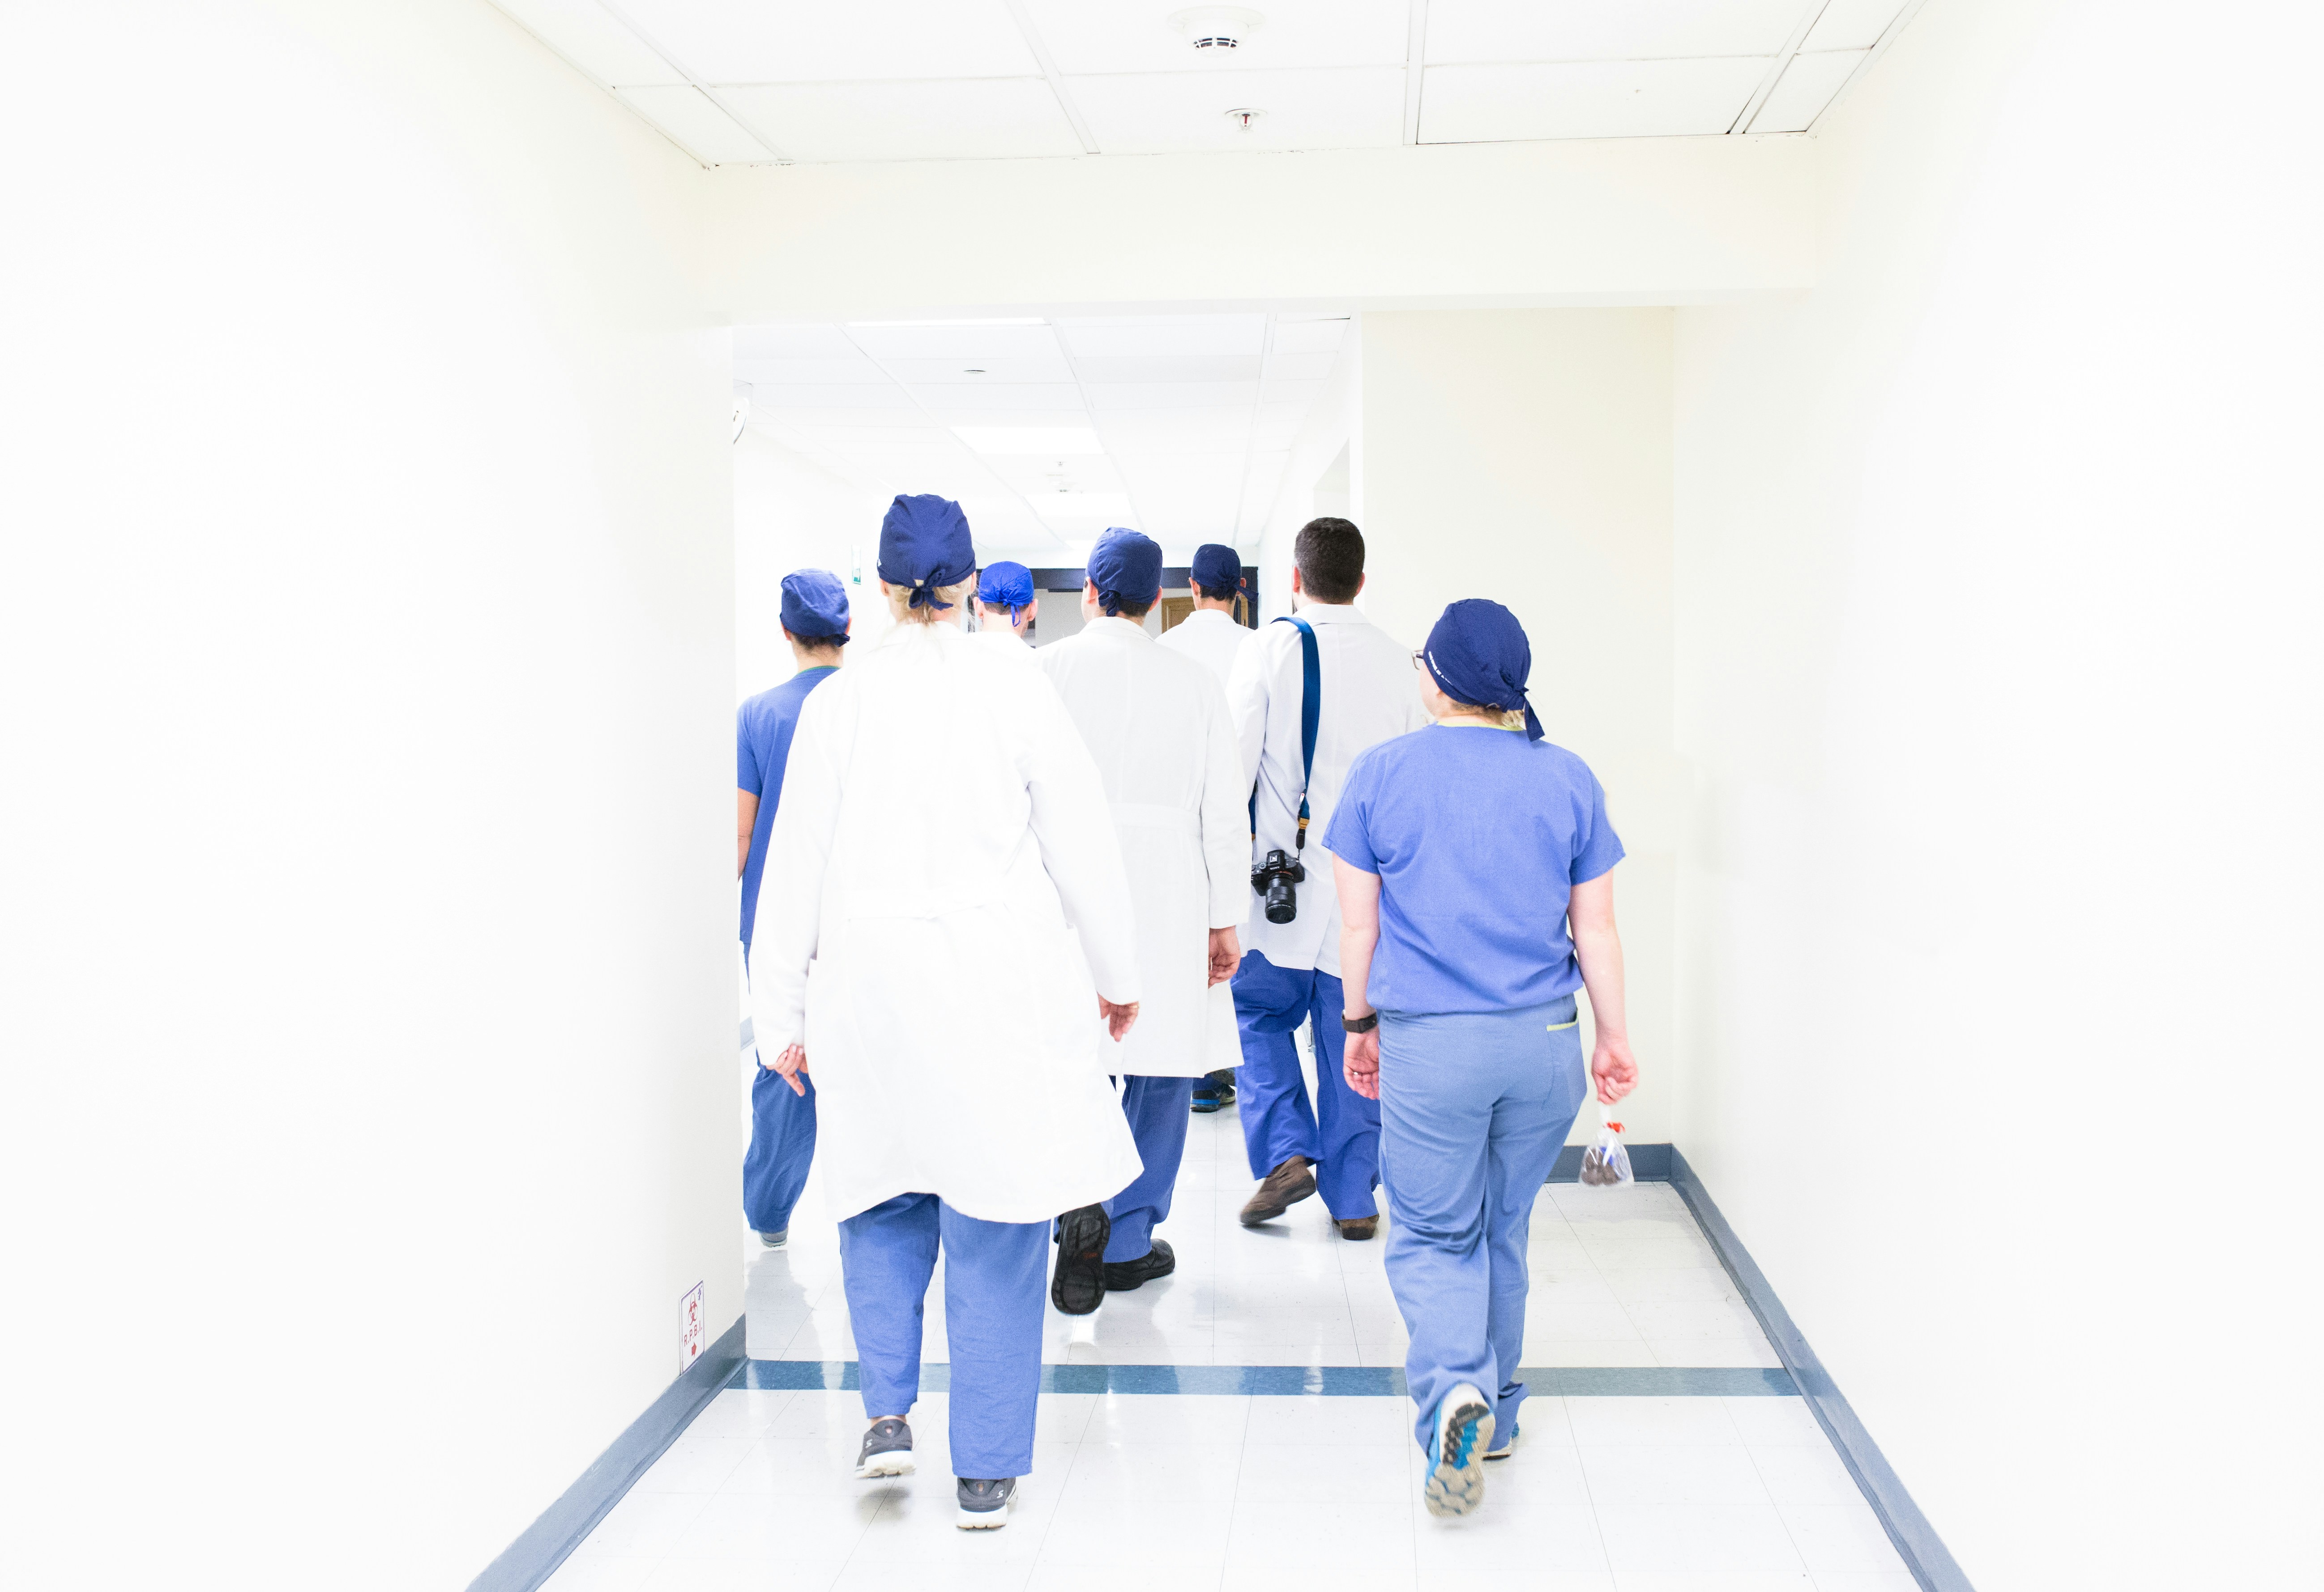 A group of healthcare professionals, including doctors and nurses walk through a brightly lit hospital corridor.